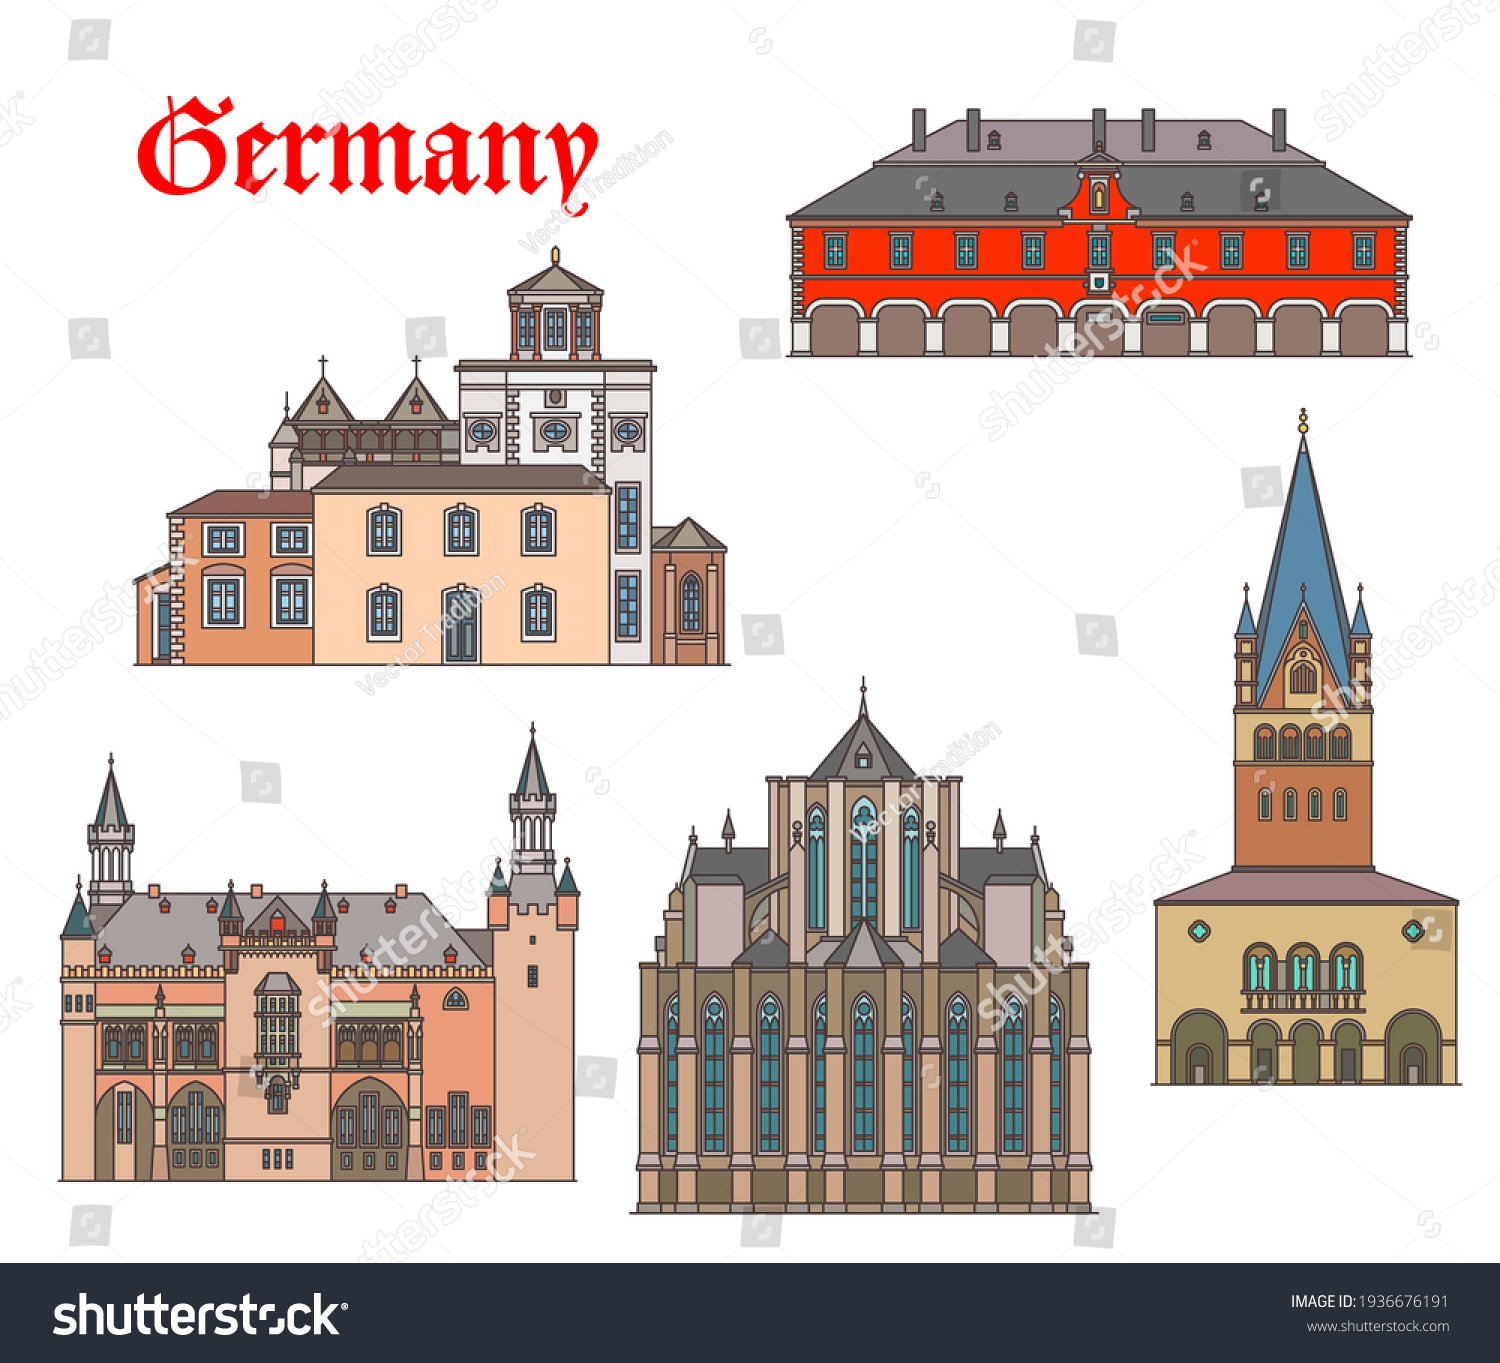 SVG of Germany landmark buildings and cathedrals of Aachen, German travel architecture, vector. Germany St Kornelius kirche, rathaus in Soest, Bergischer Dom cathedral in Altenberg and St. Patrokli church svg